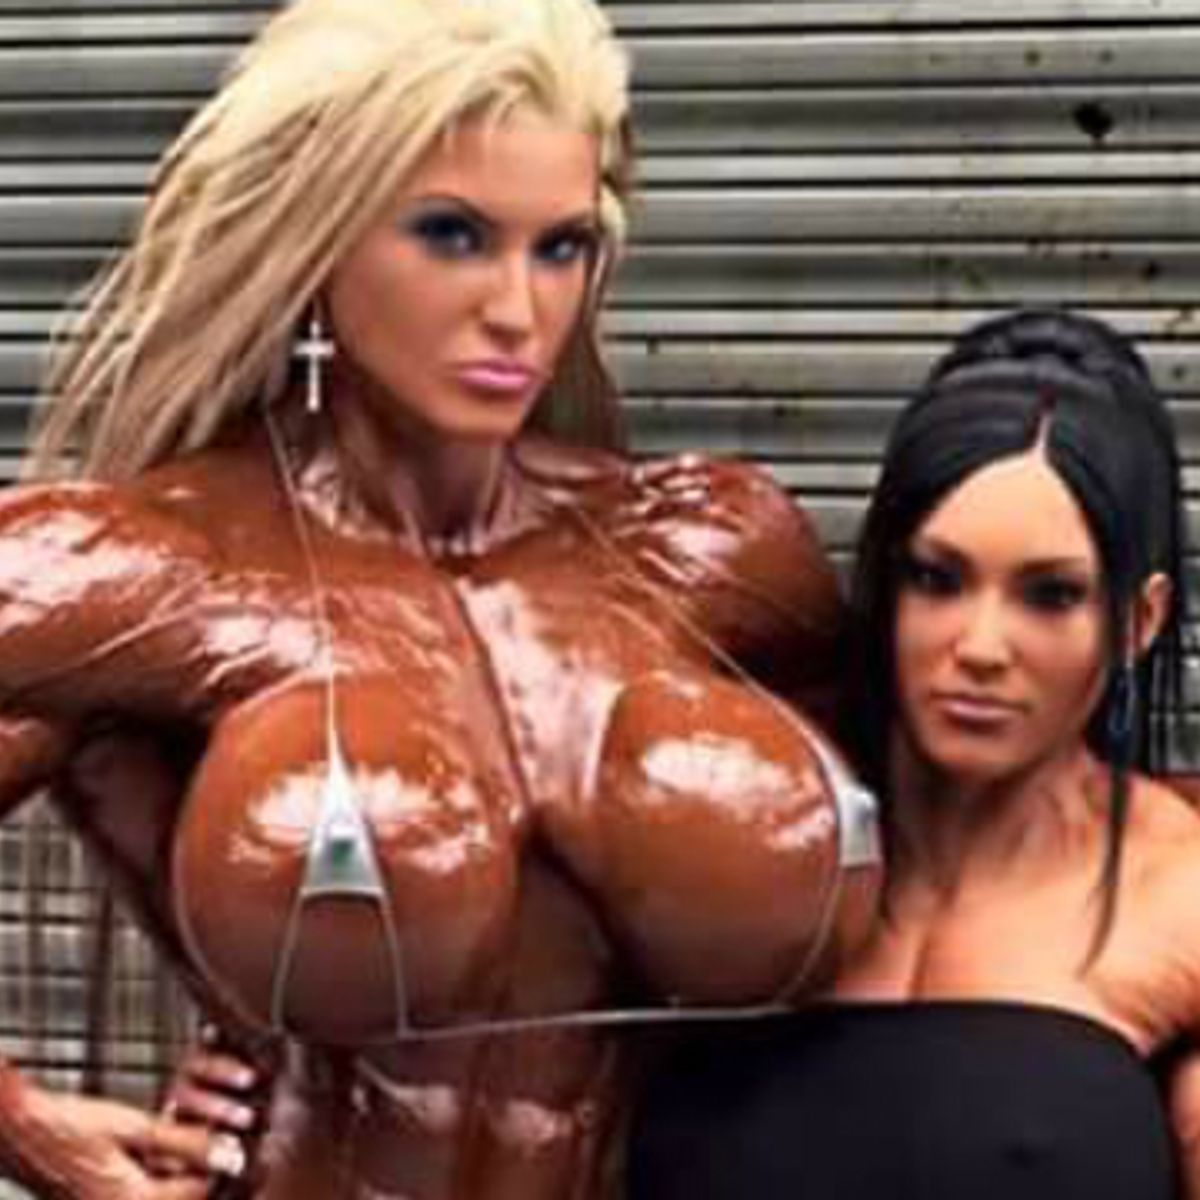 Muscular women with big boobs